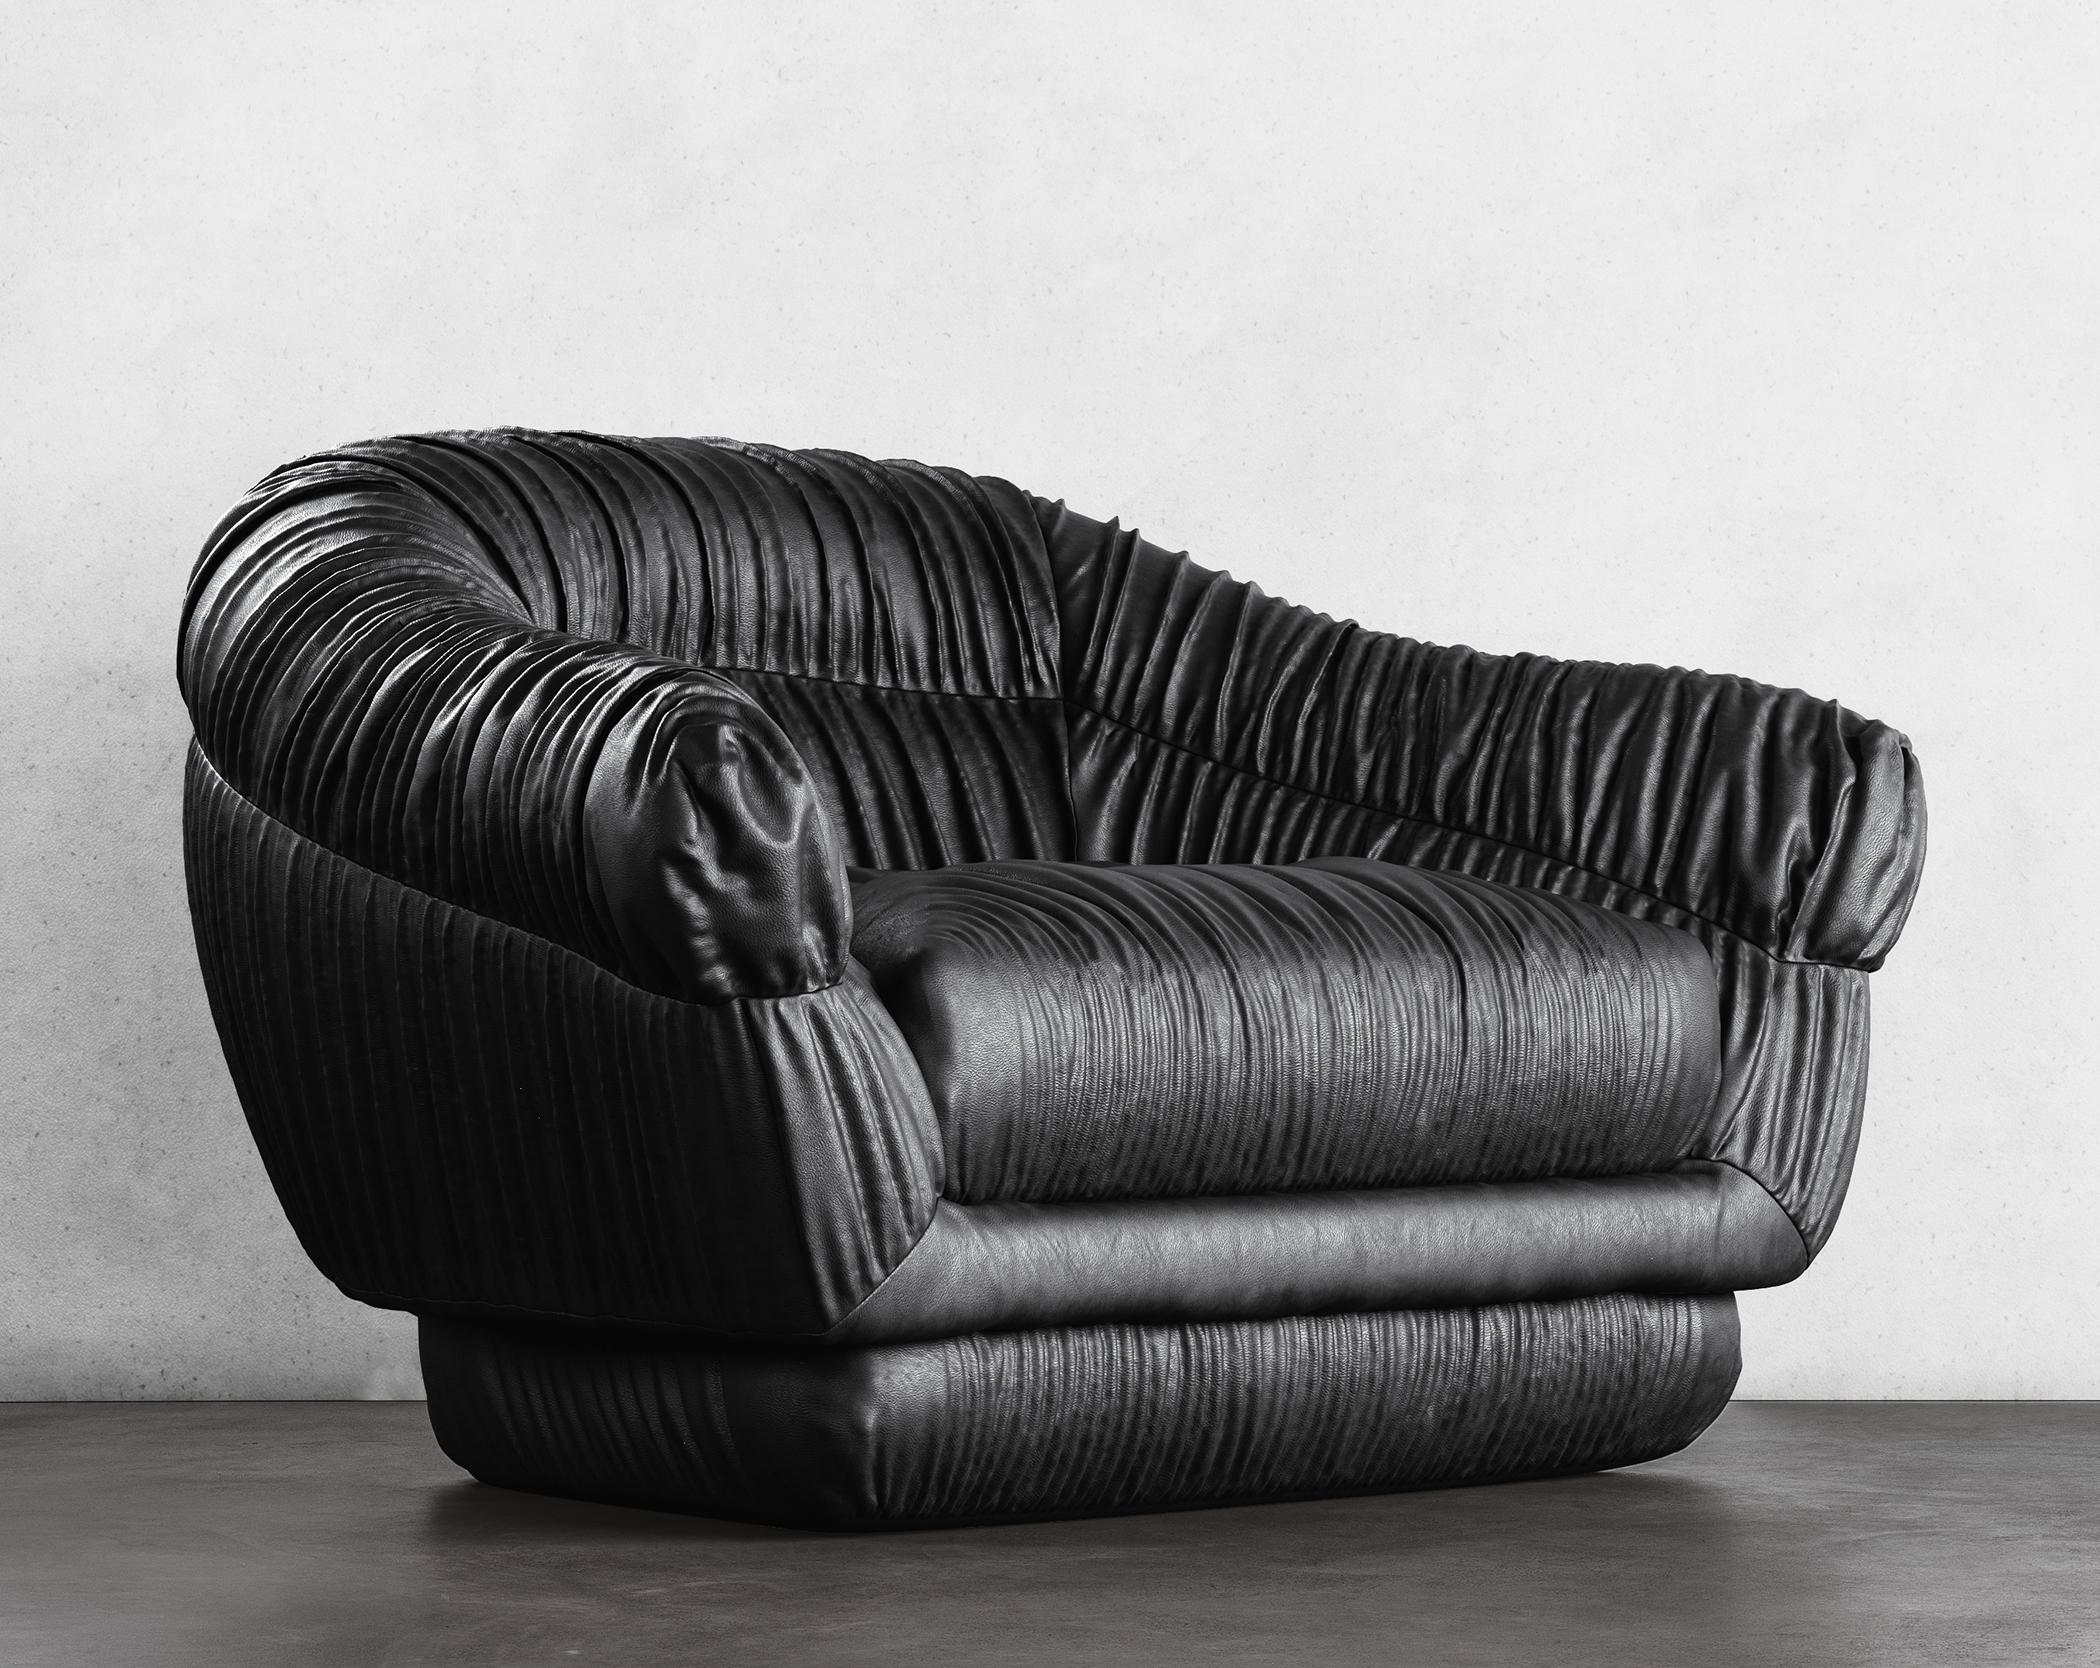 SWERVE LOUNGE CHAIR - Modern Design in Faux Lambskin Black

The Swerve Lounge Chair with black faux lambskin upholstery and modern ruched design is a stylish and comfortable addition to any living space. The chair features a sleek and sophisticated